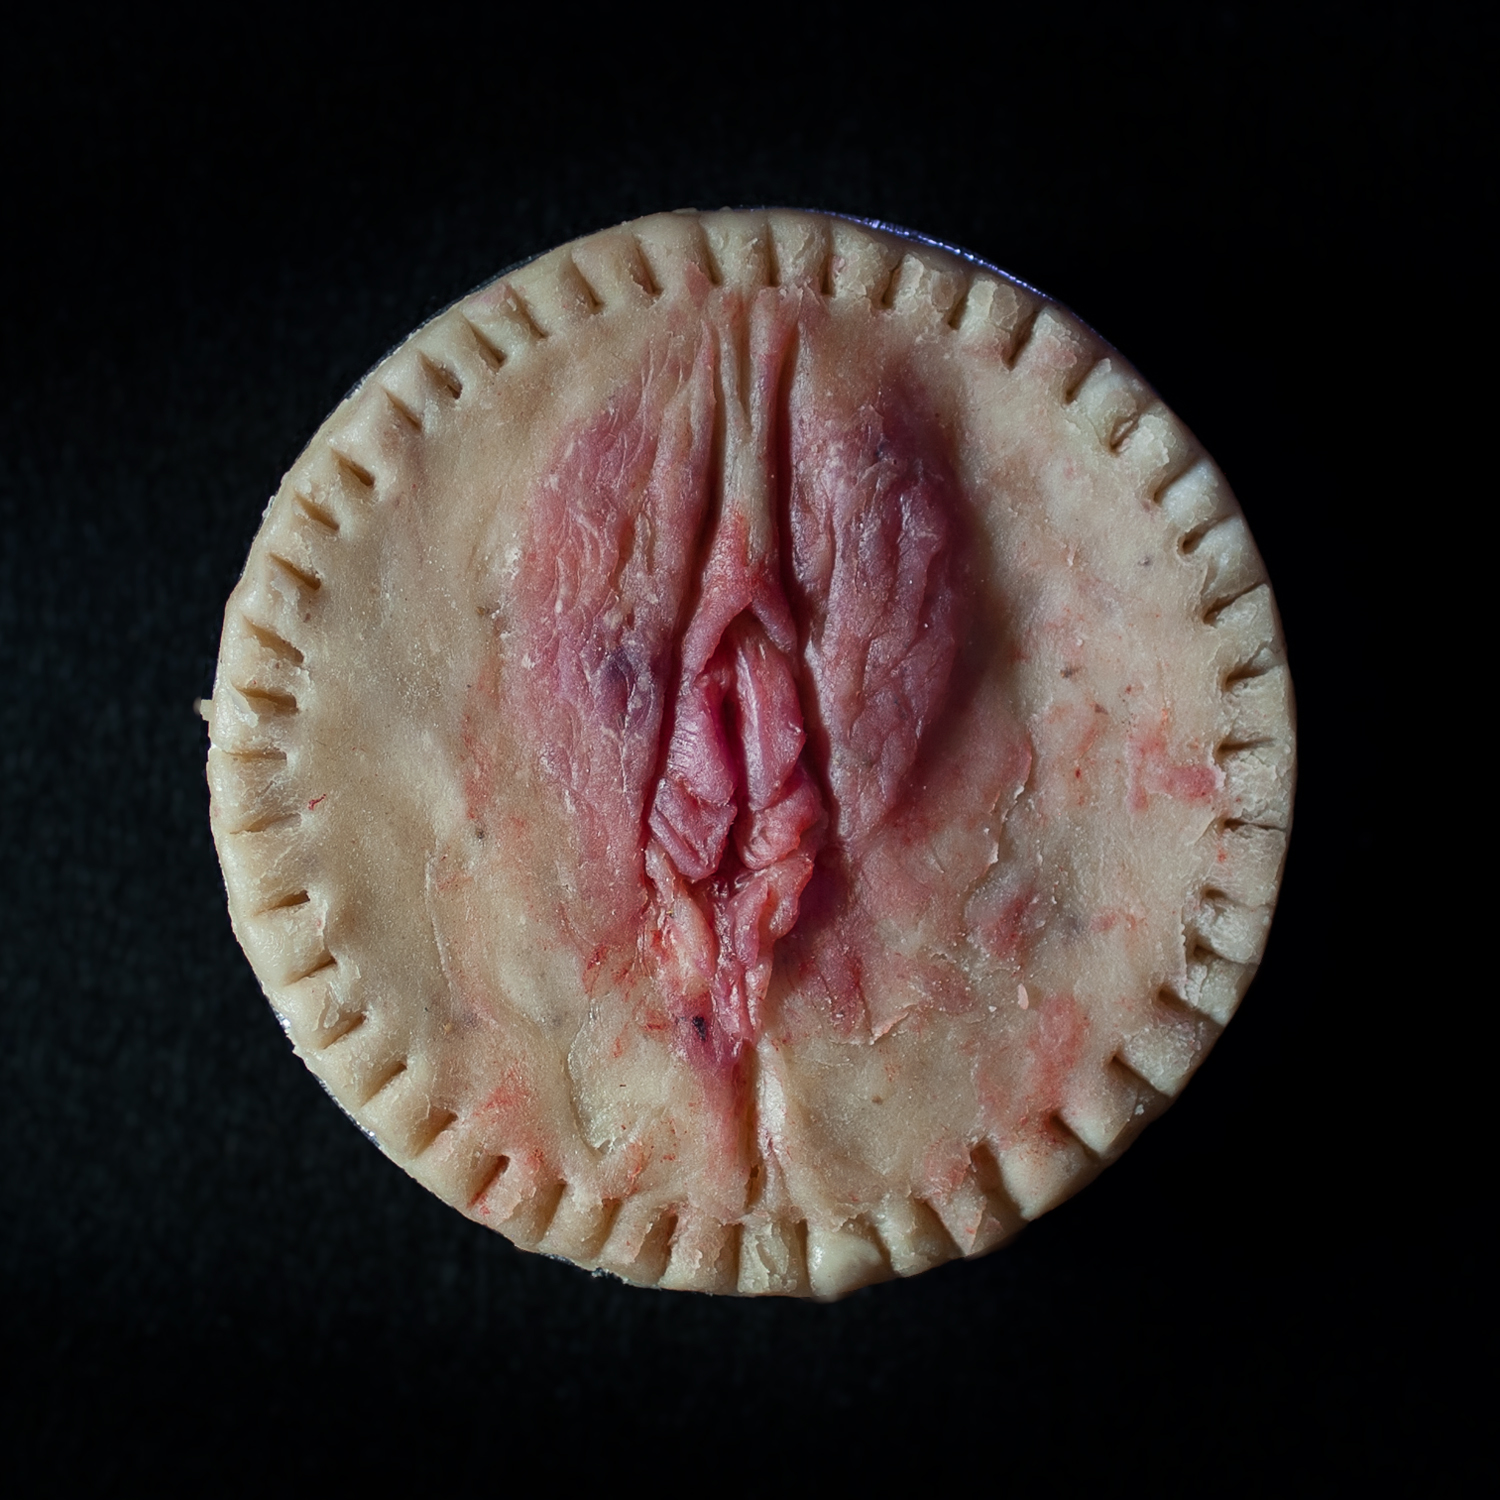 4 inch peach vulva pie with a realistic pie crust design, coloring made with freeze-dried strawberries